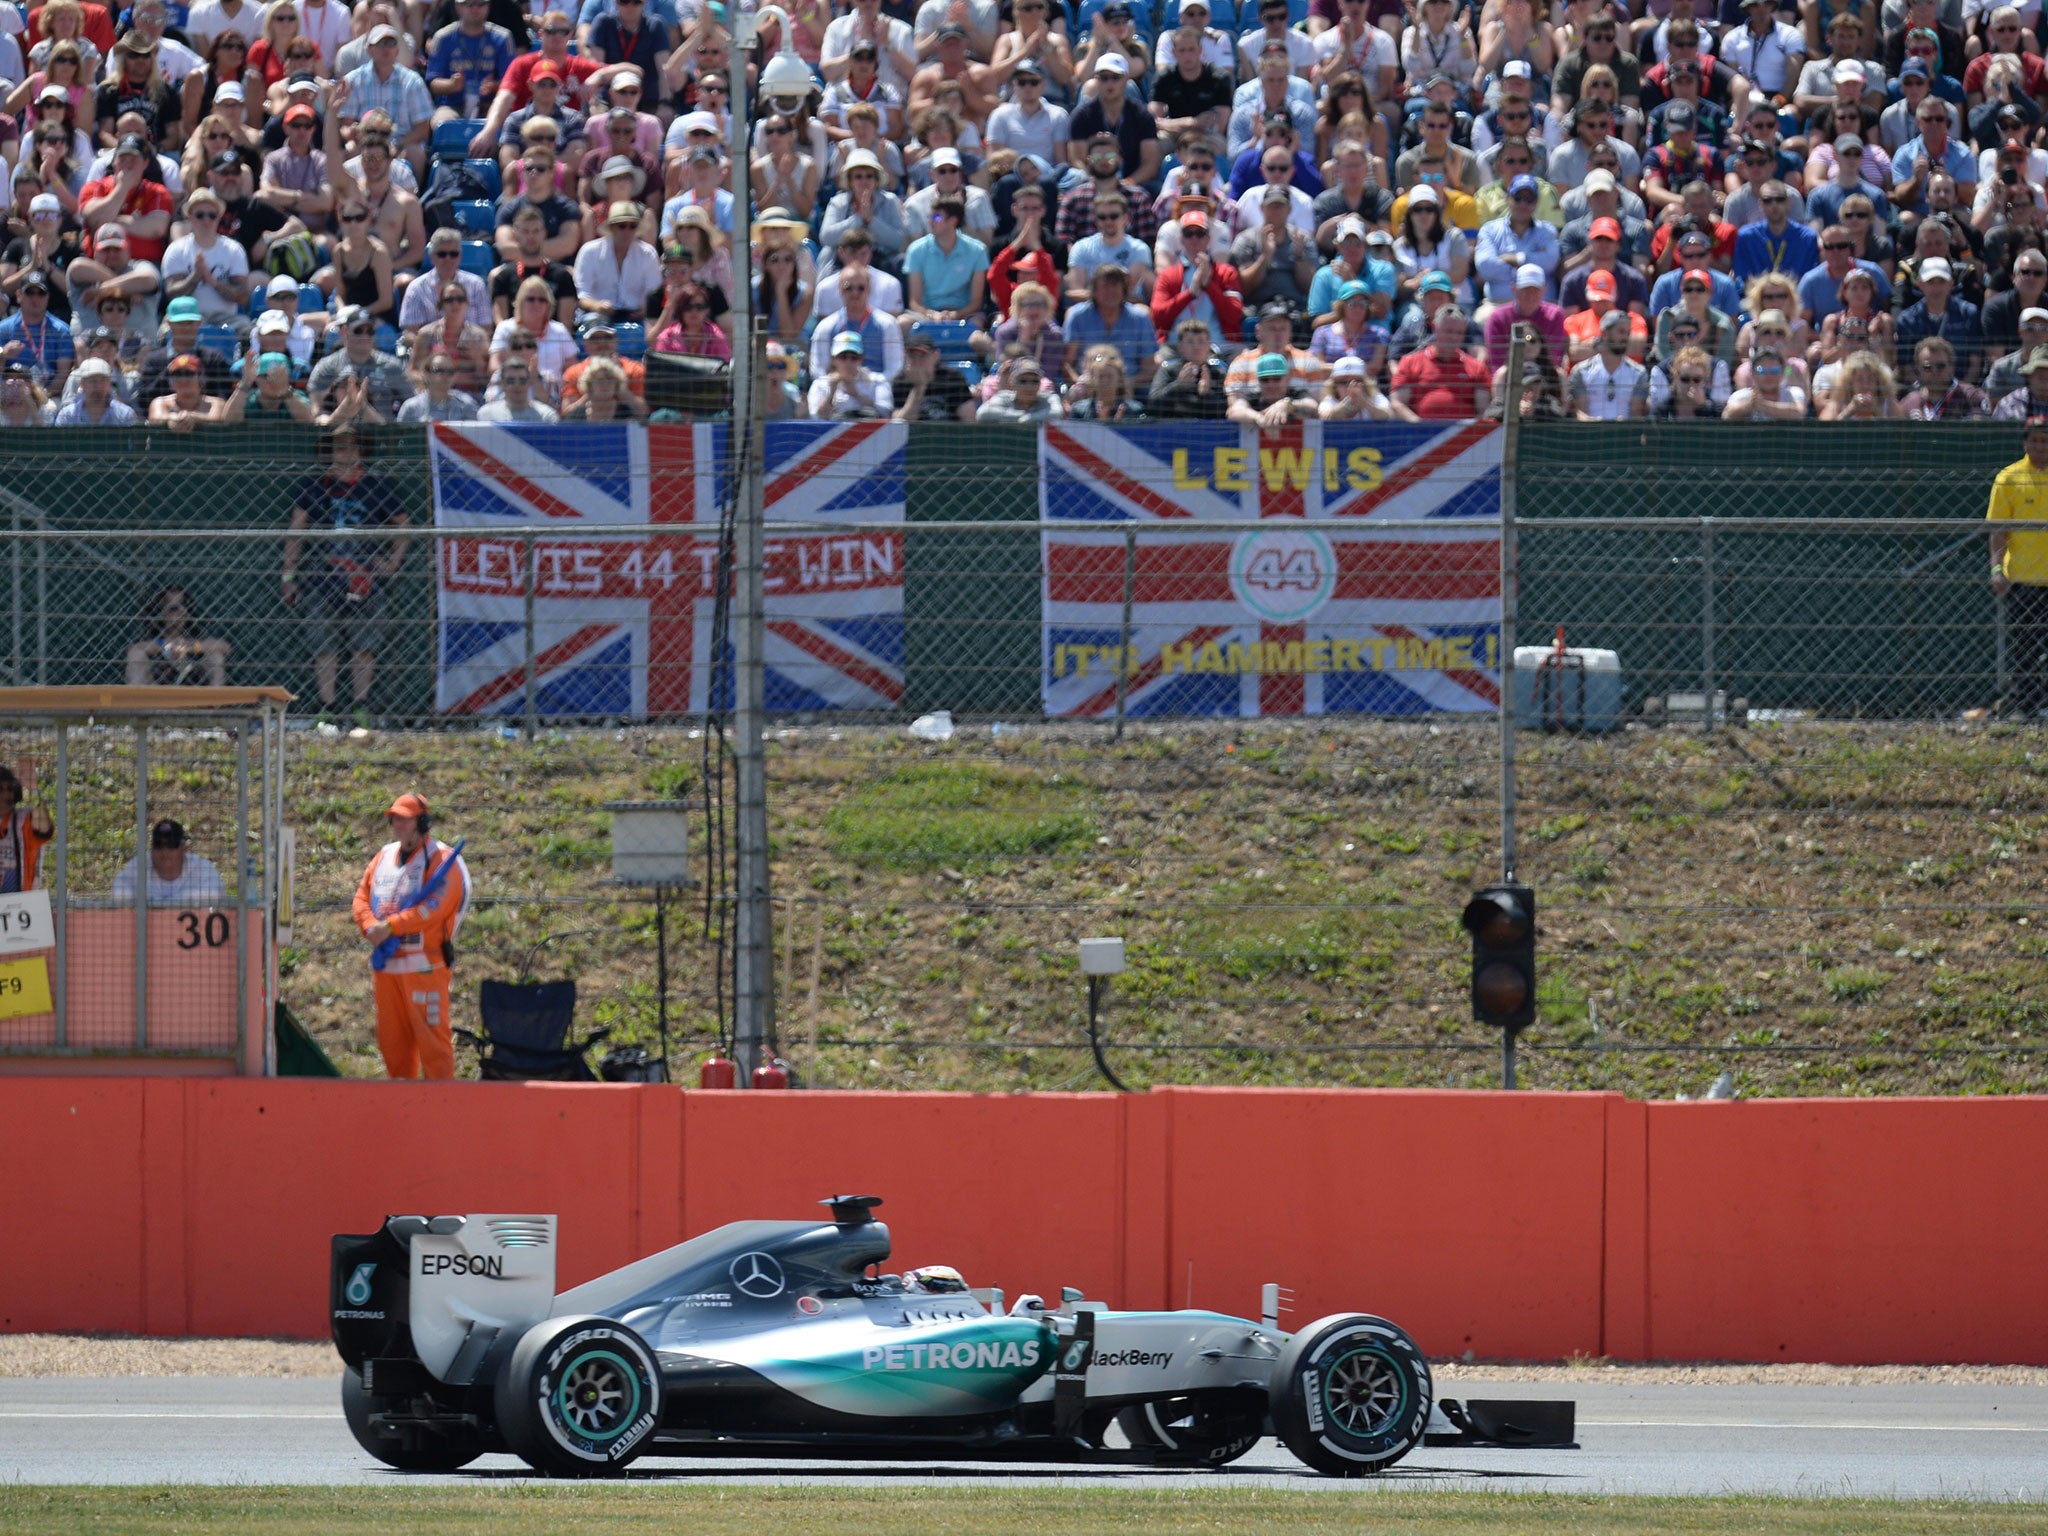 Lewis Hamilton takes pole on front of his home fans